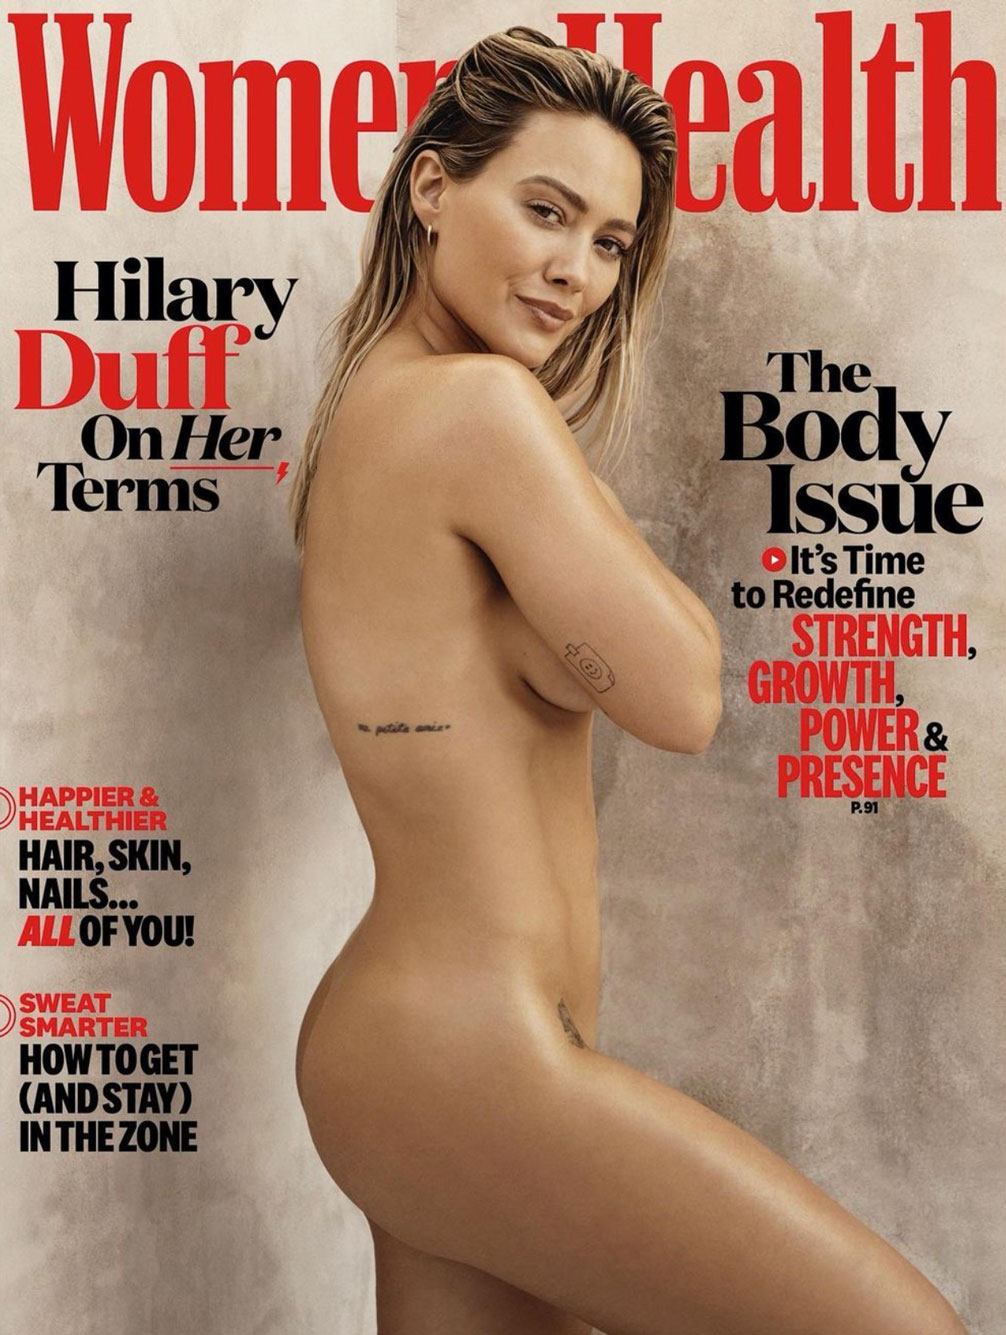 men's health - Wome Wealth Hilary Duff On Her Terms The Body Issue olt's Time to Redefine Strength, Growth Power & Presence le P.91 Happier & Healthier Hair, Skin, Nails... All Of You! Sweat Smarter How To Get And Stay In The Zone